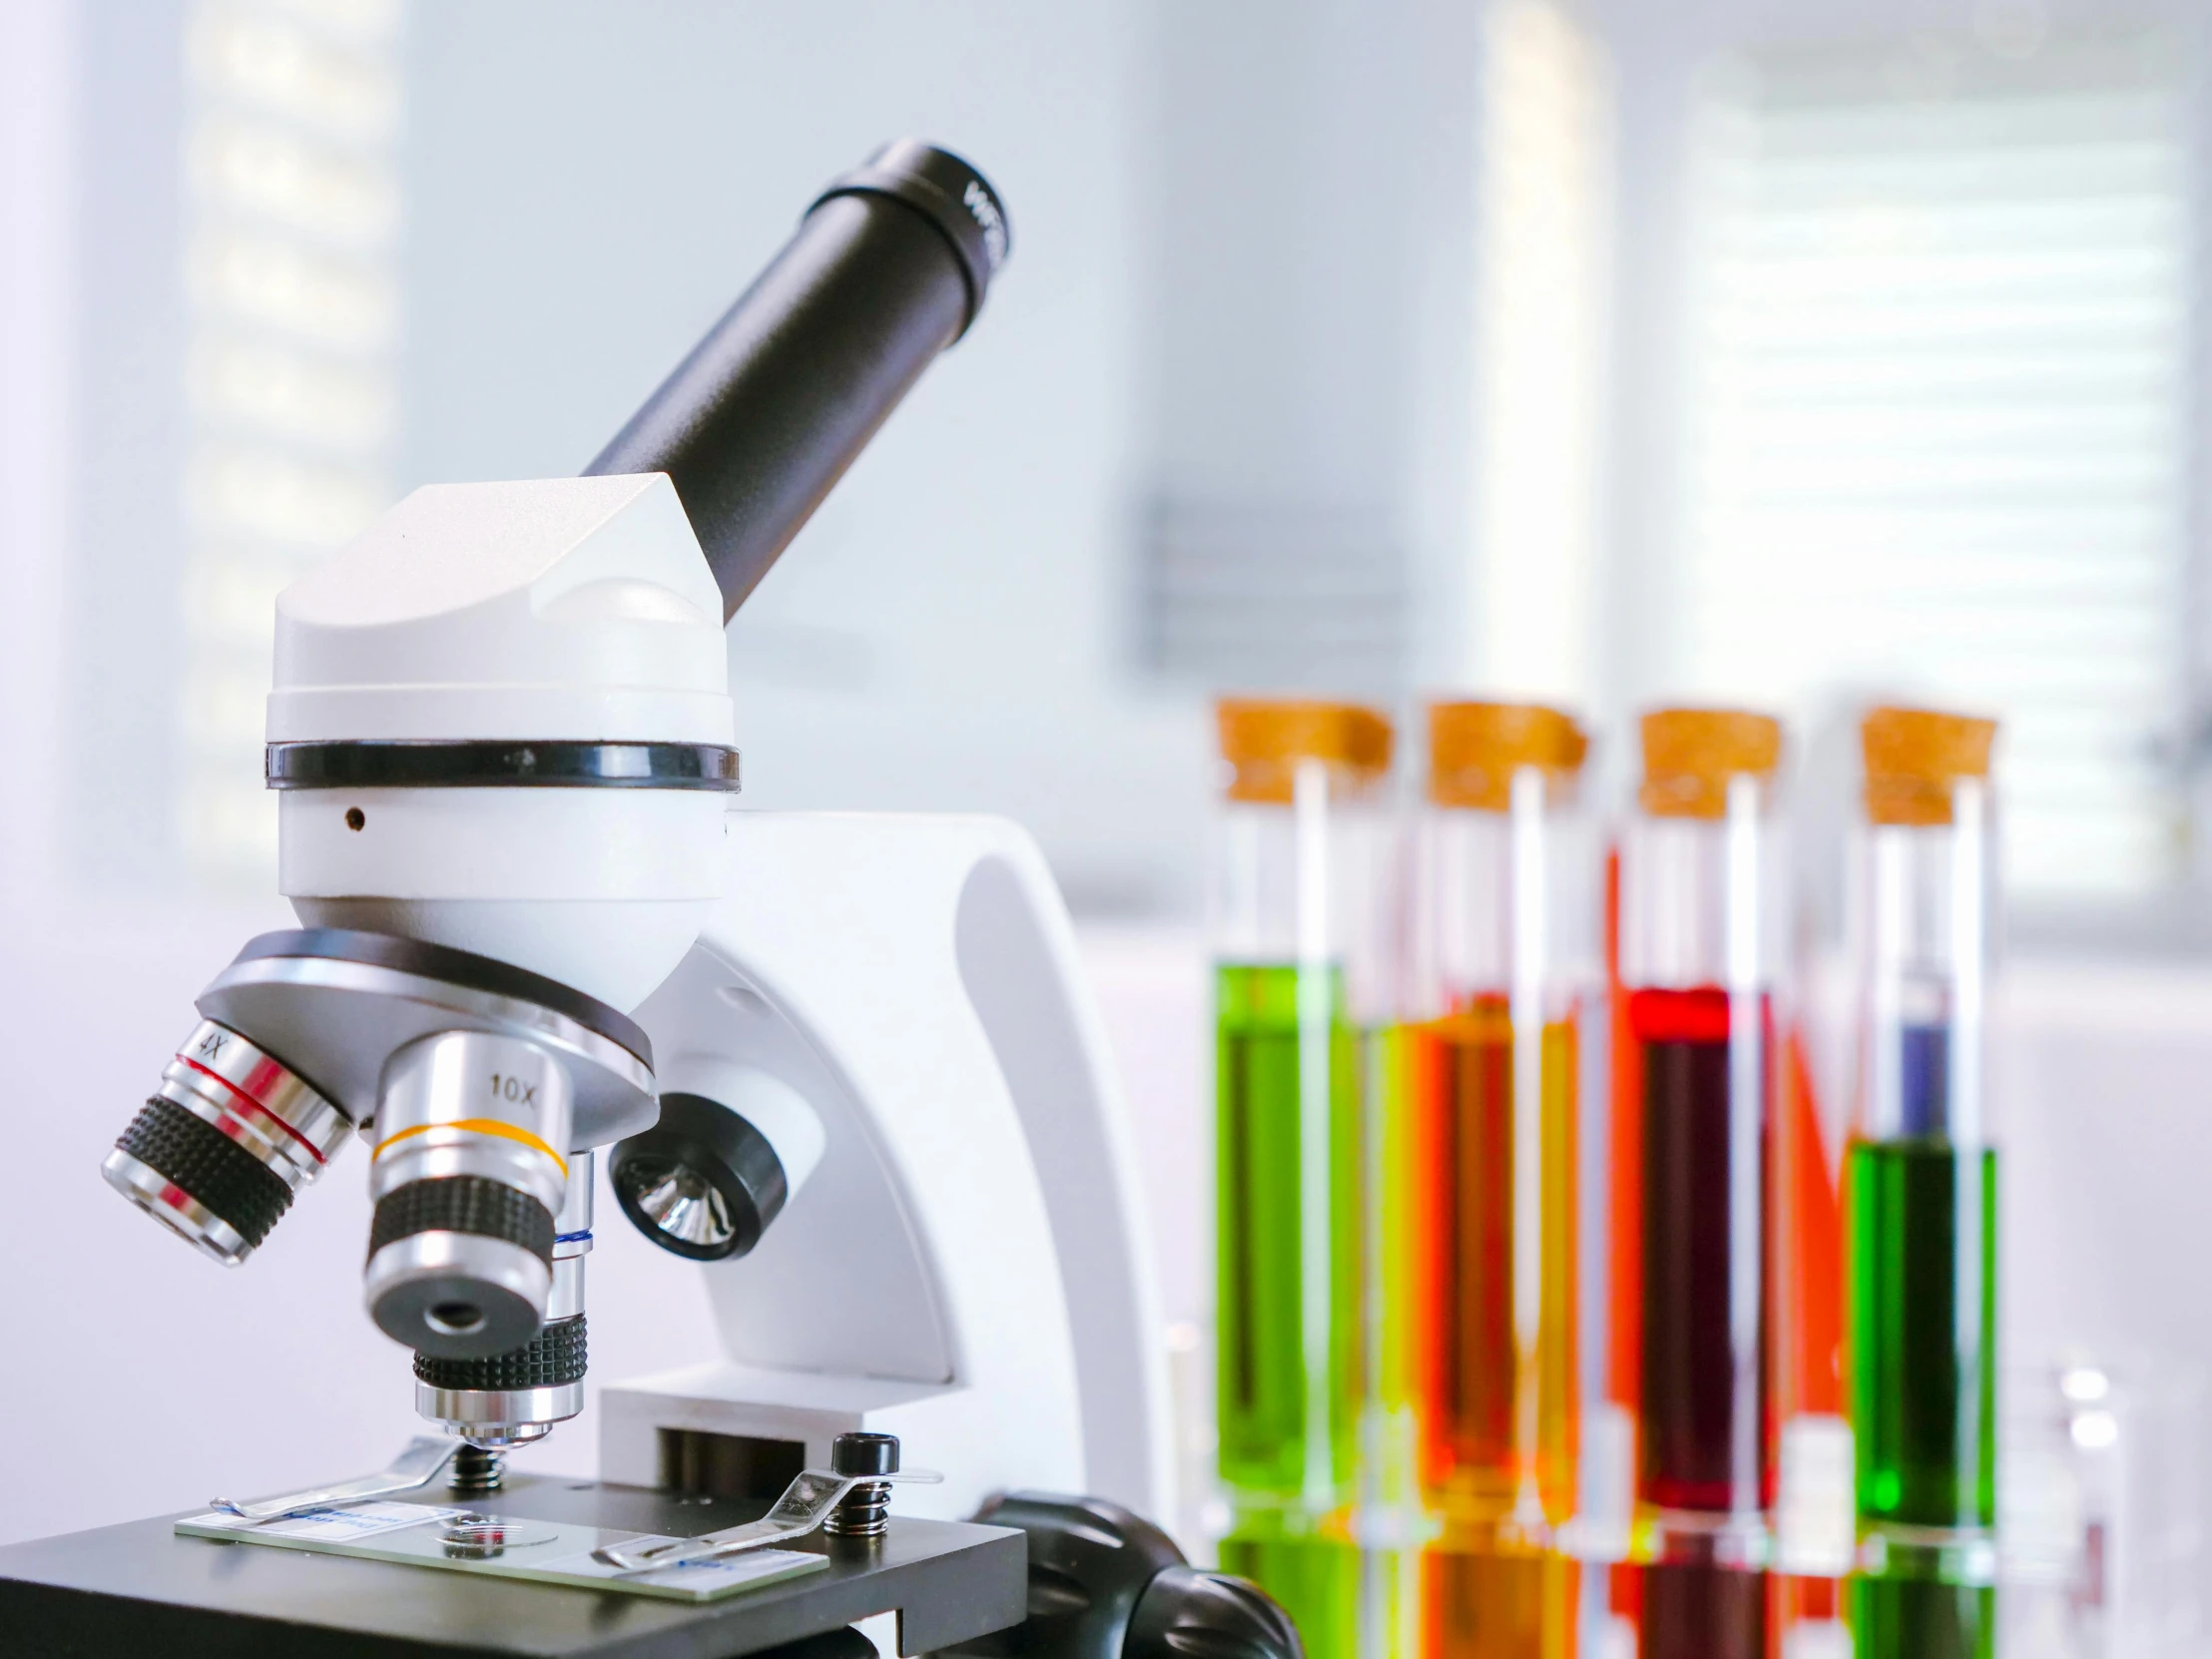 a microscope sitting on top of a table next to test tubes, a microscopic photo, shutterstock, a brightly coloured, schools, aesthetics, medical equipment